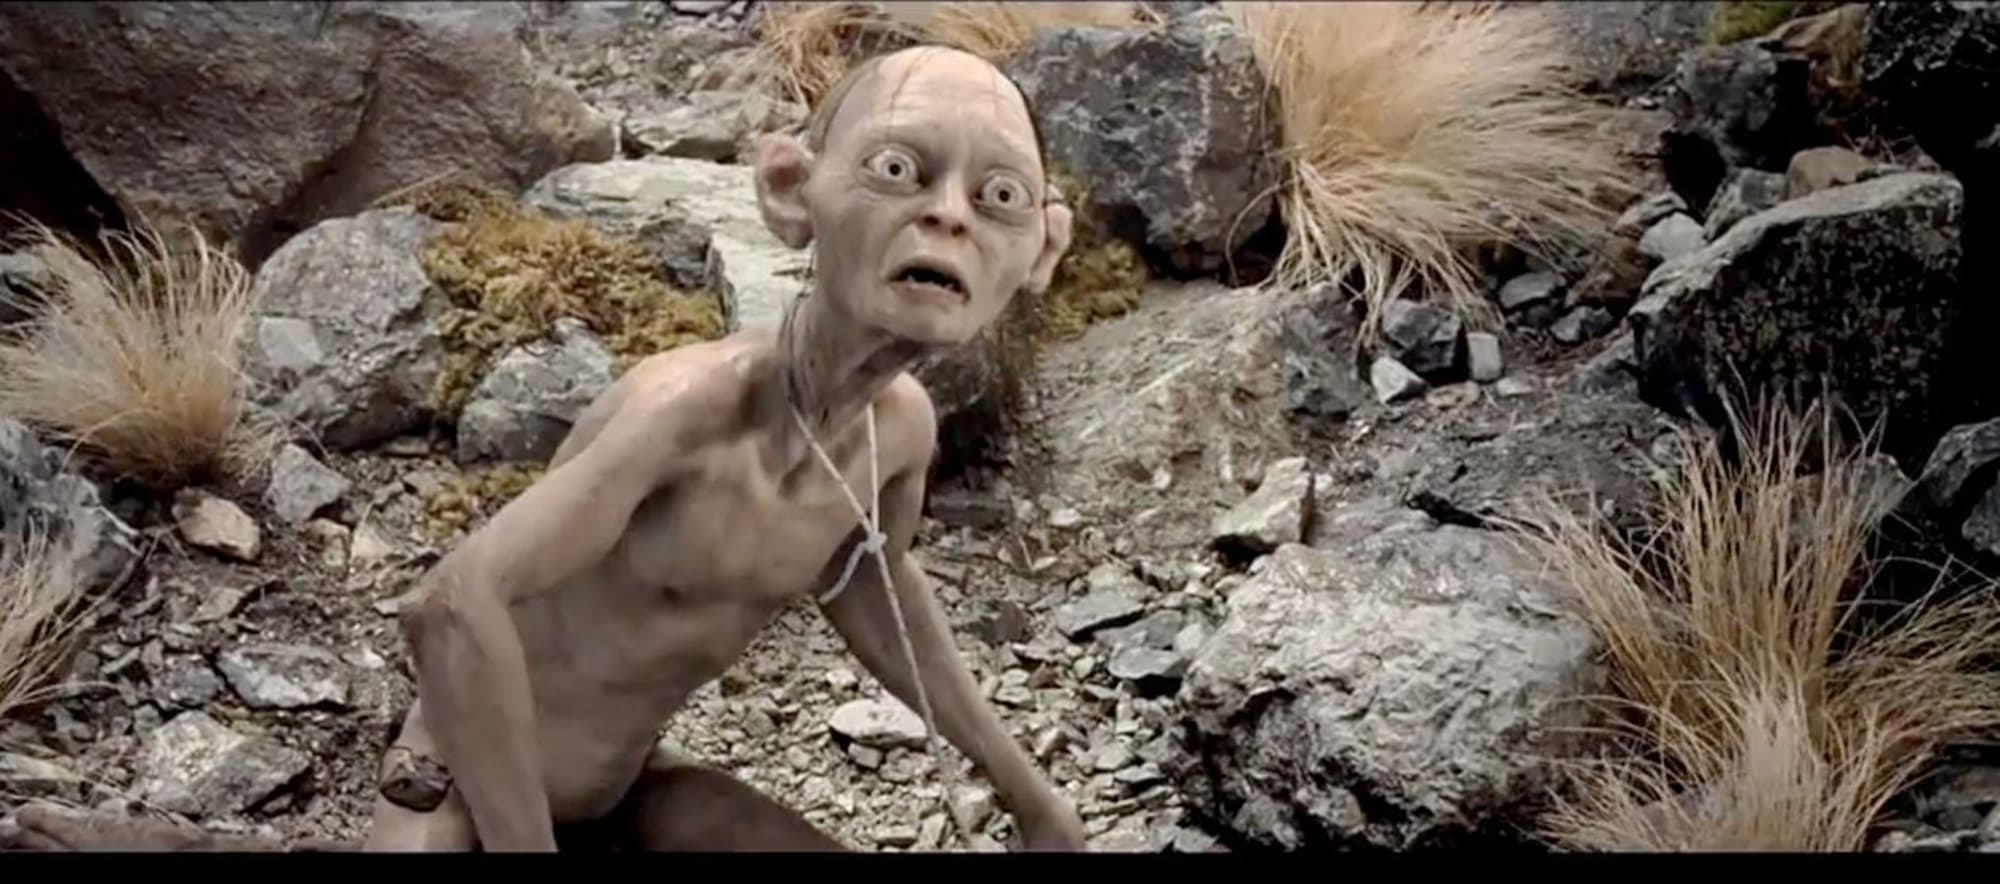 Andy Serkis (Gollum) got to keep the One Ring from The Lord of the Rings